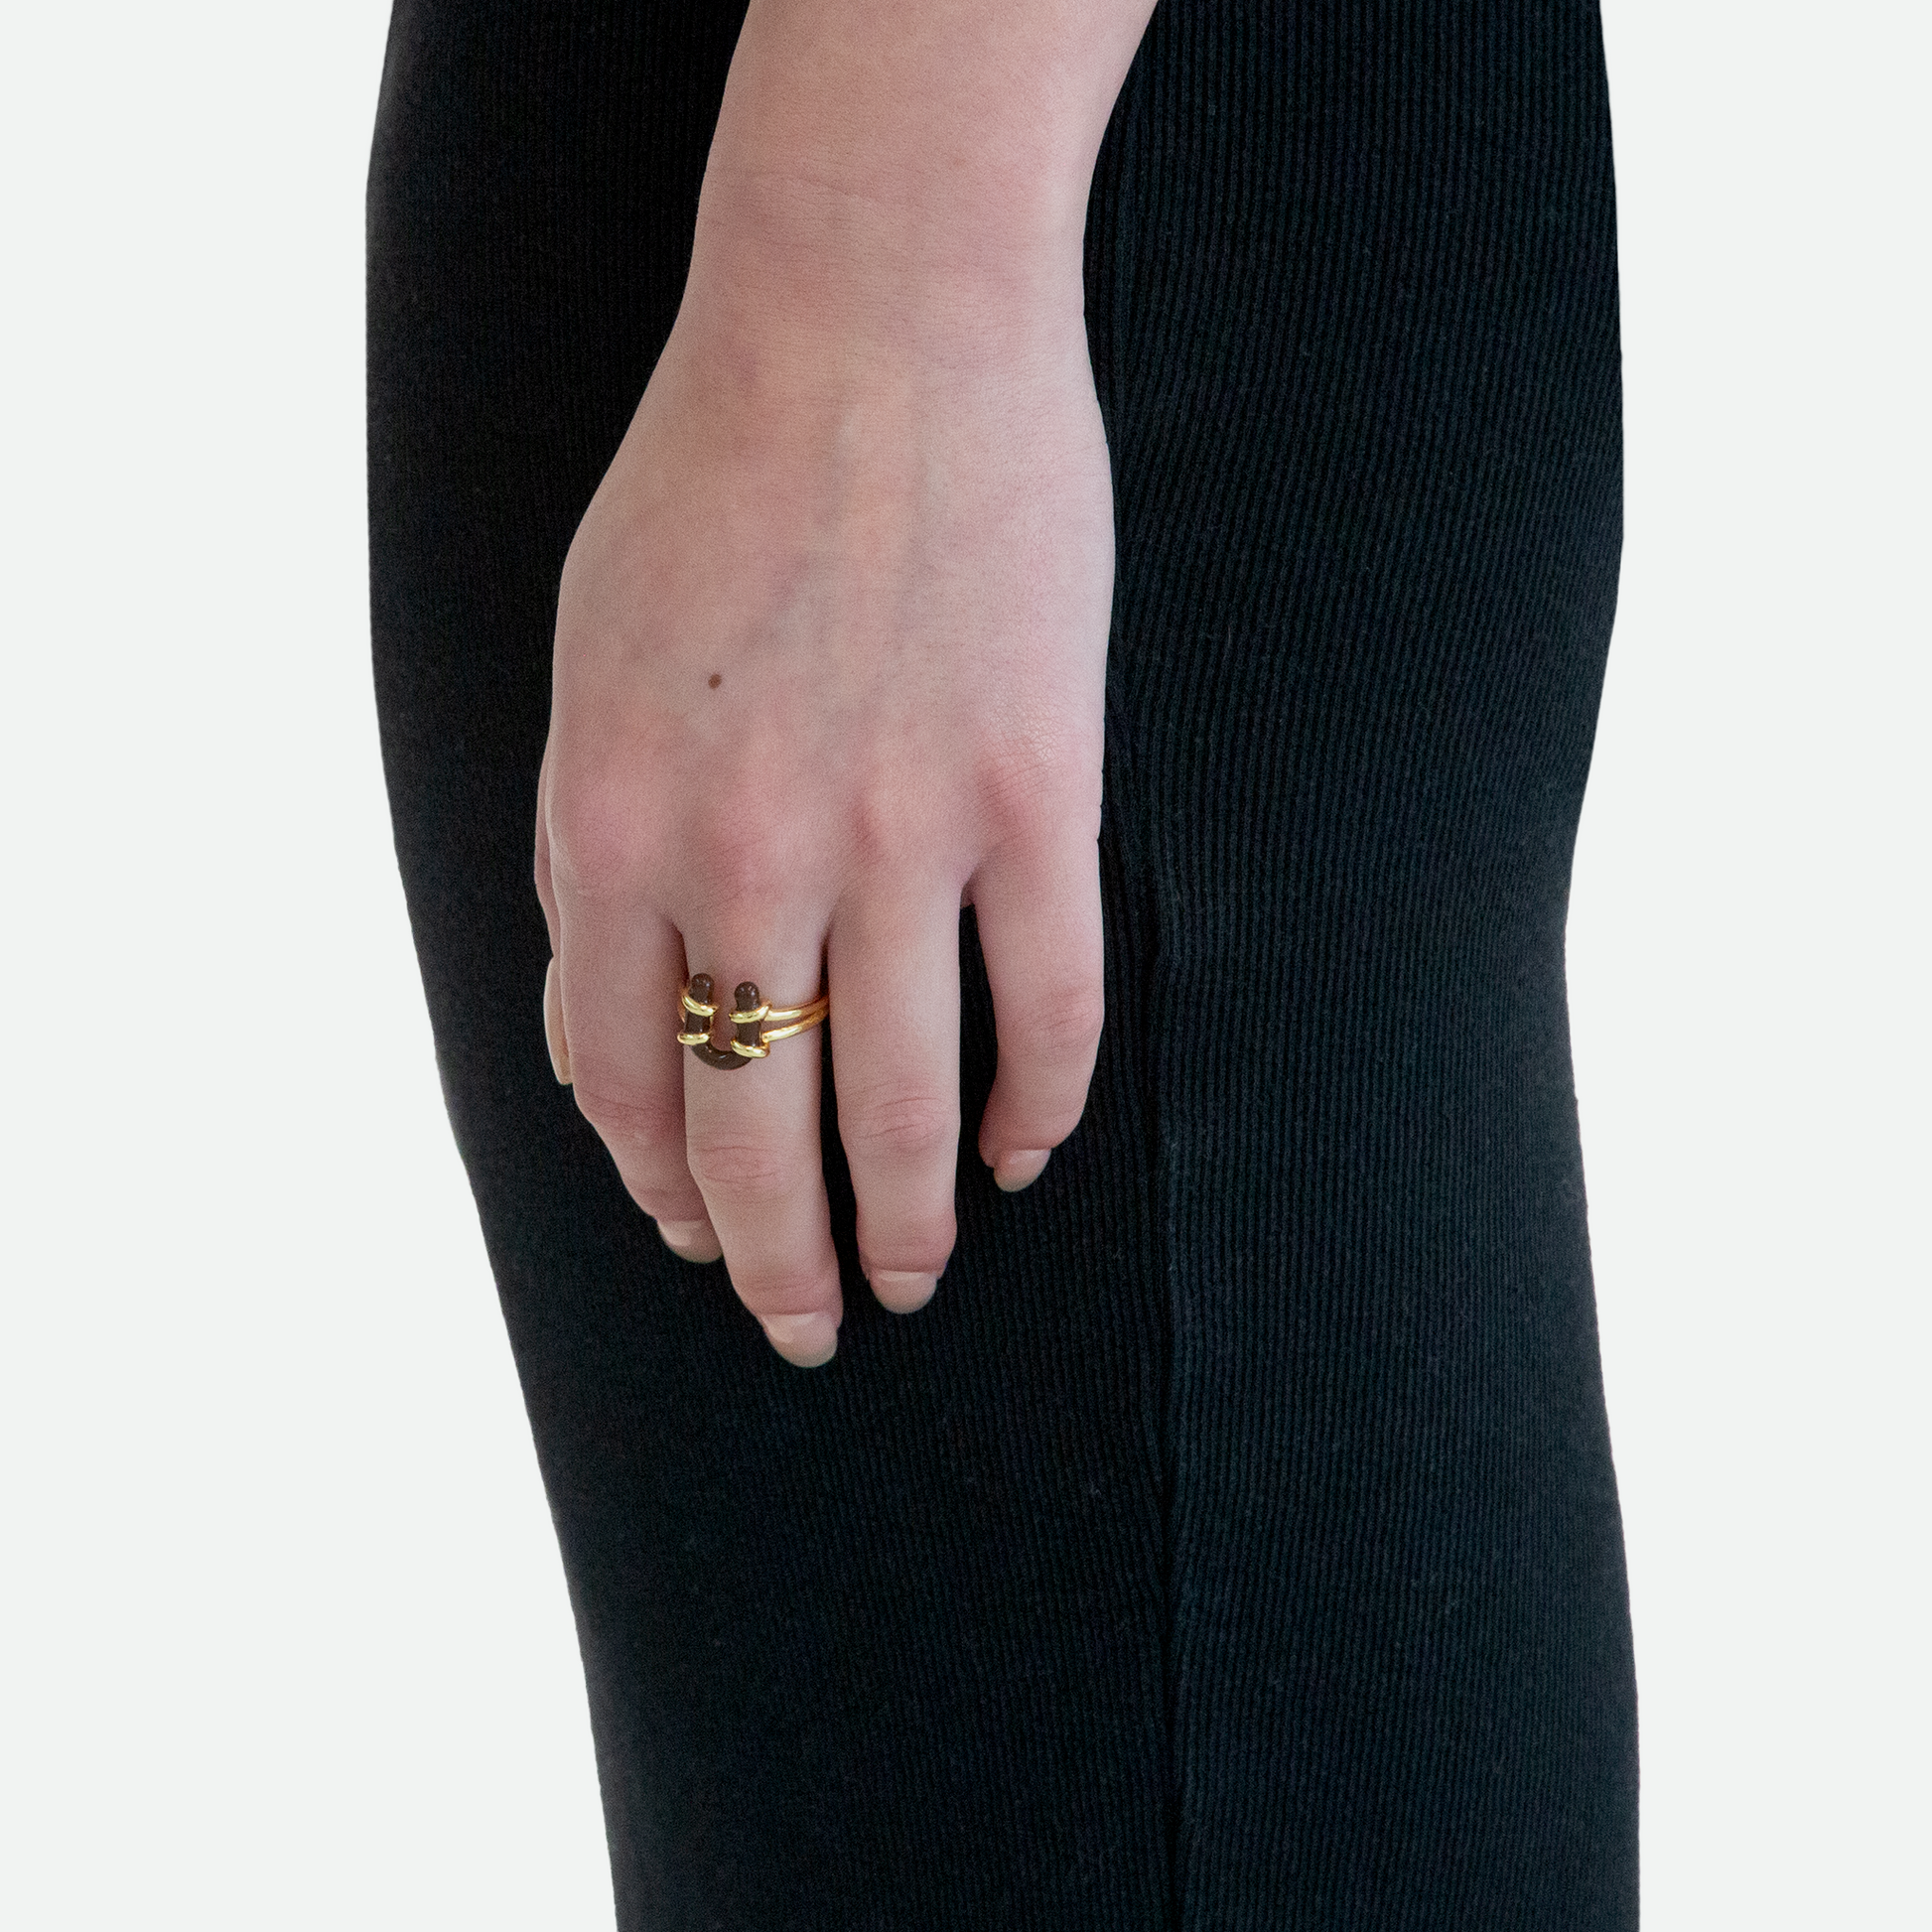 Side view of a model's hand wearing the Enamel Barbell Ring, emphasizing the coffee enamel U-shaped piercing within the contrasting golden loop, designed by Ruggeri.